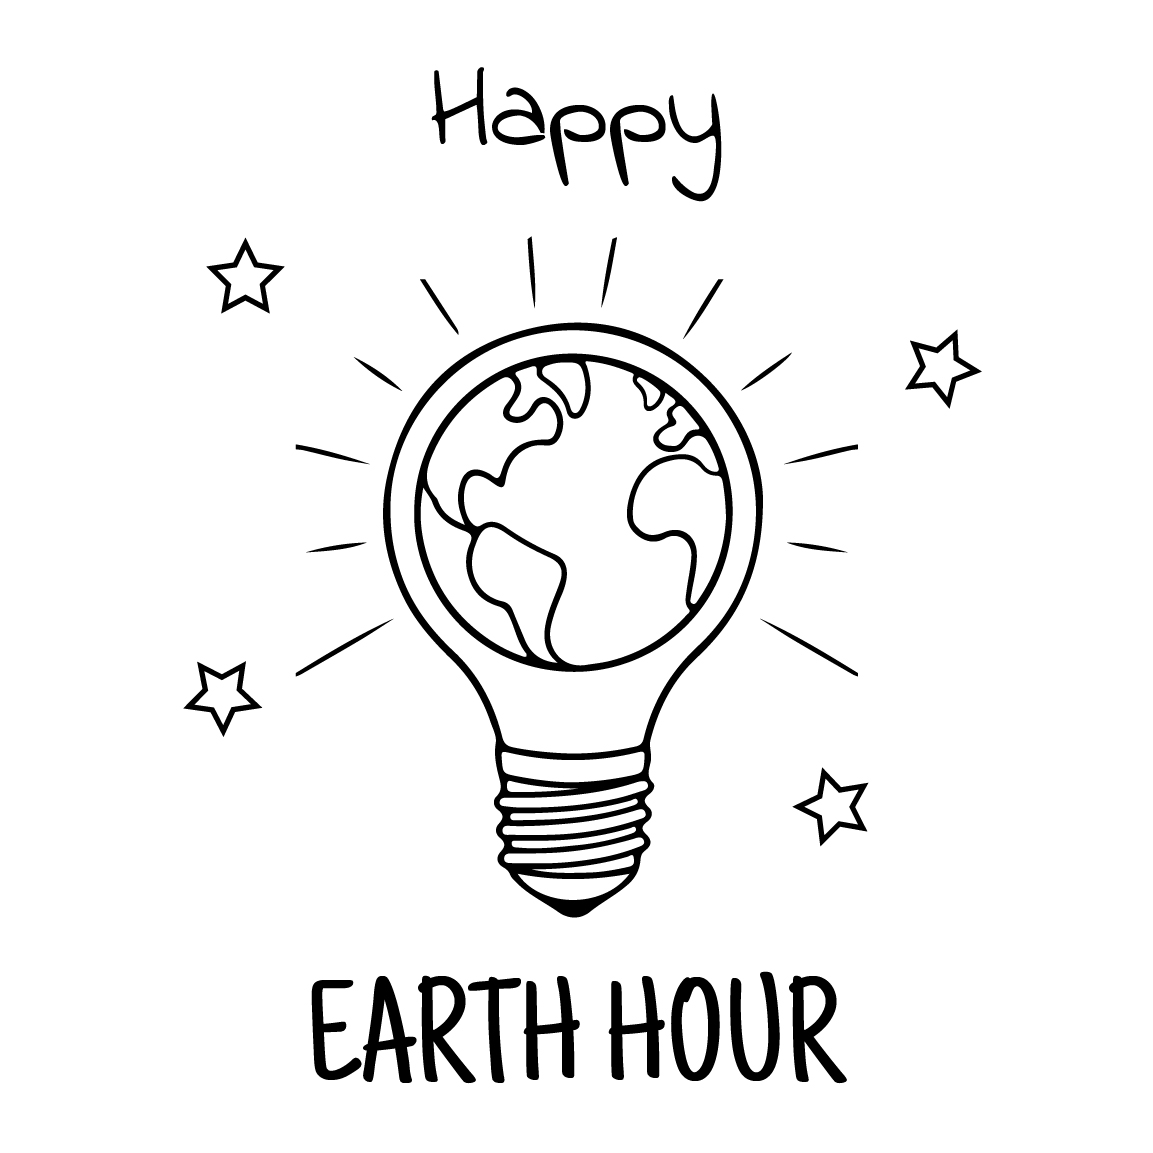 Free Earth Hour Drawing Vector in Illustrator, PSD, EPS, SVG, JPG, PNG